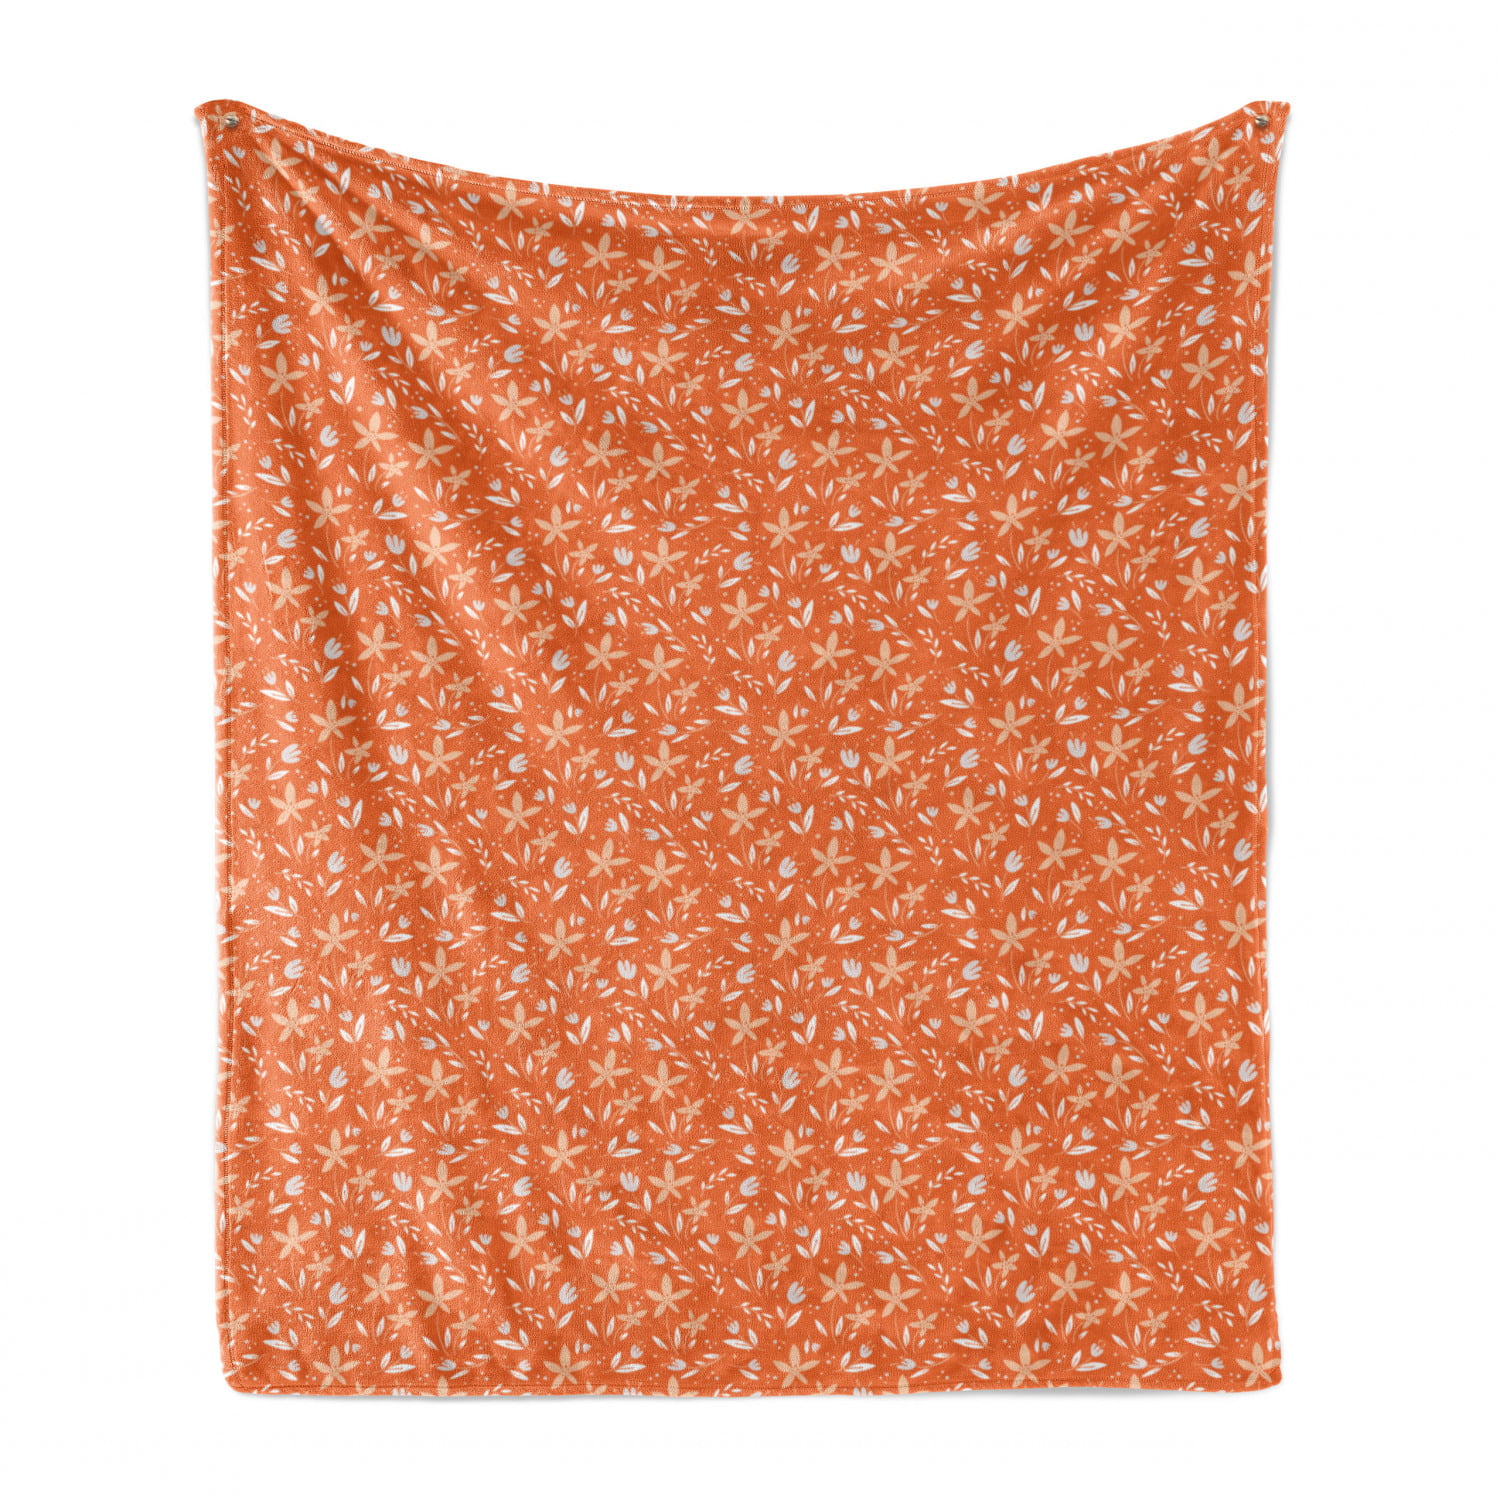 Ambesonne Floral Soft Flannel Fleece Throw Blanket Champagne Orange Silhouettes of Nature Elements and Dots on Warm Colored Background 50 x 70 Cozy Plush for Indoor and Outdoor Use